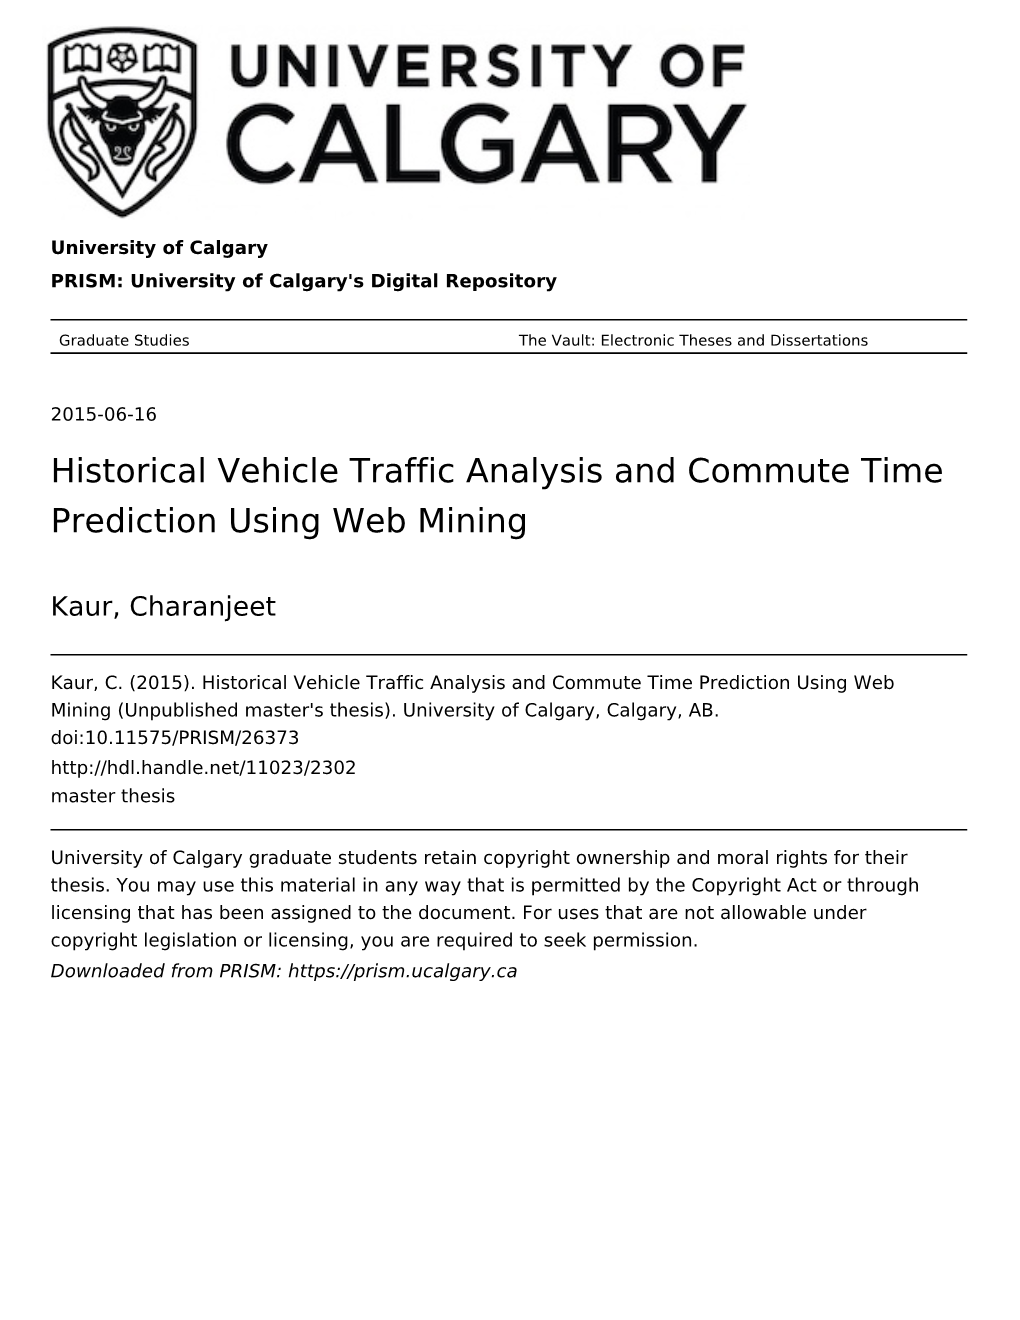 Historical Vehicle Traffic Analysis and Commute Time Prediction Using Web Mining